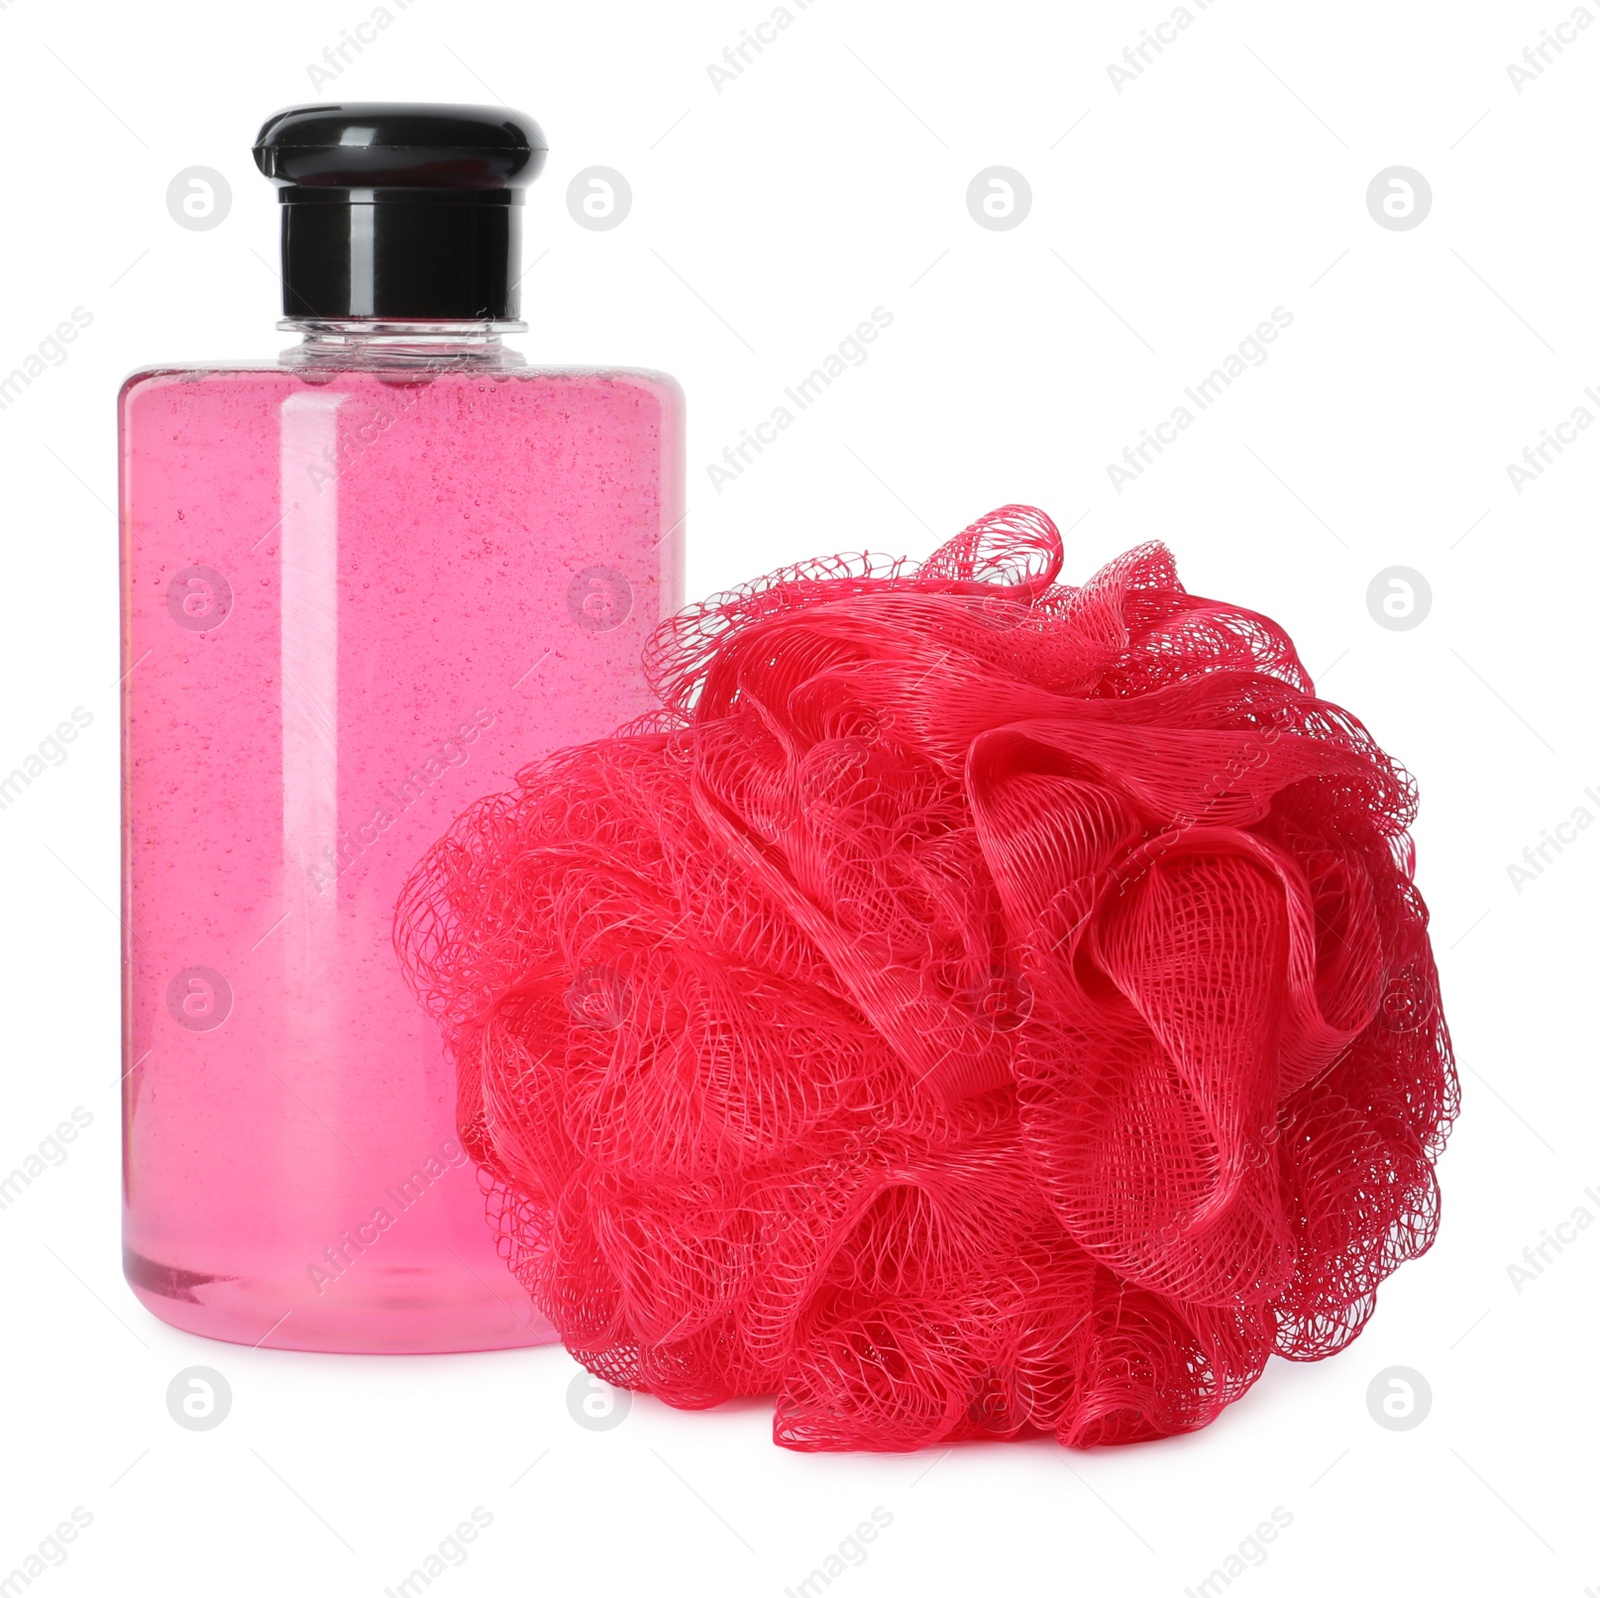 Photo of Personal hygiene product and shower puff on white background